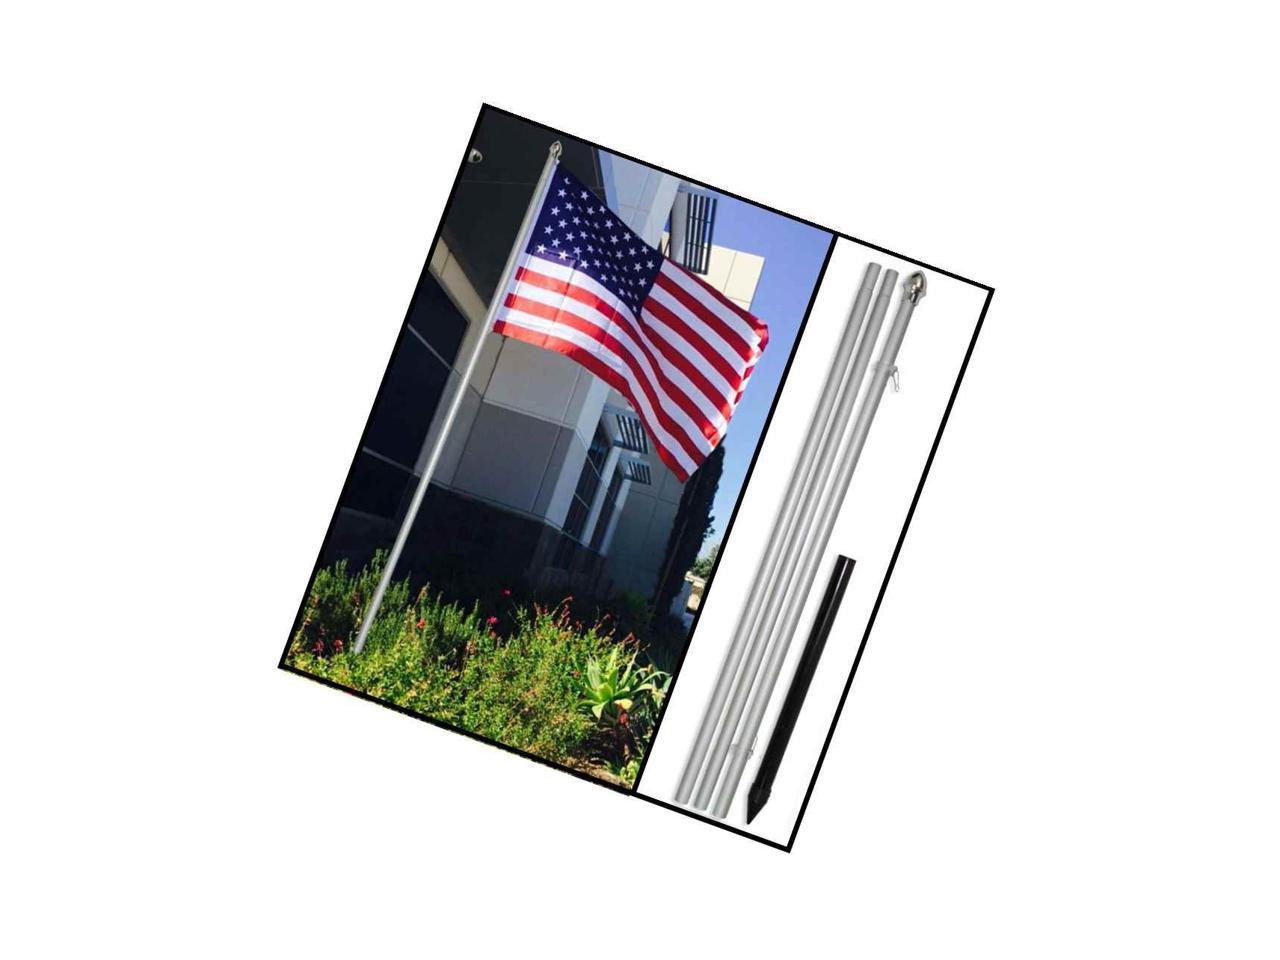 Flags Importer 13ft Aluminum Outdoor Pole with Ground Spike Black